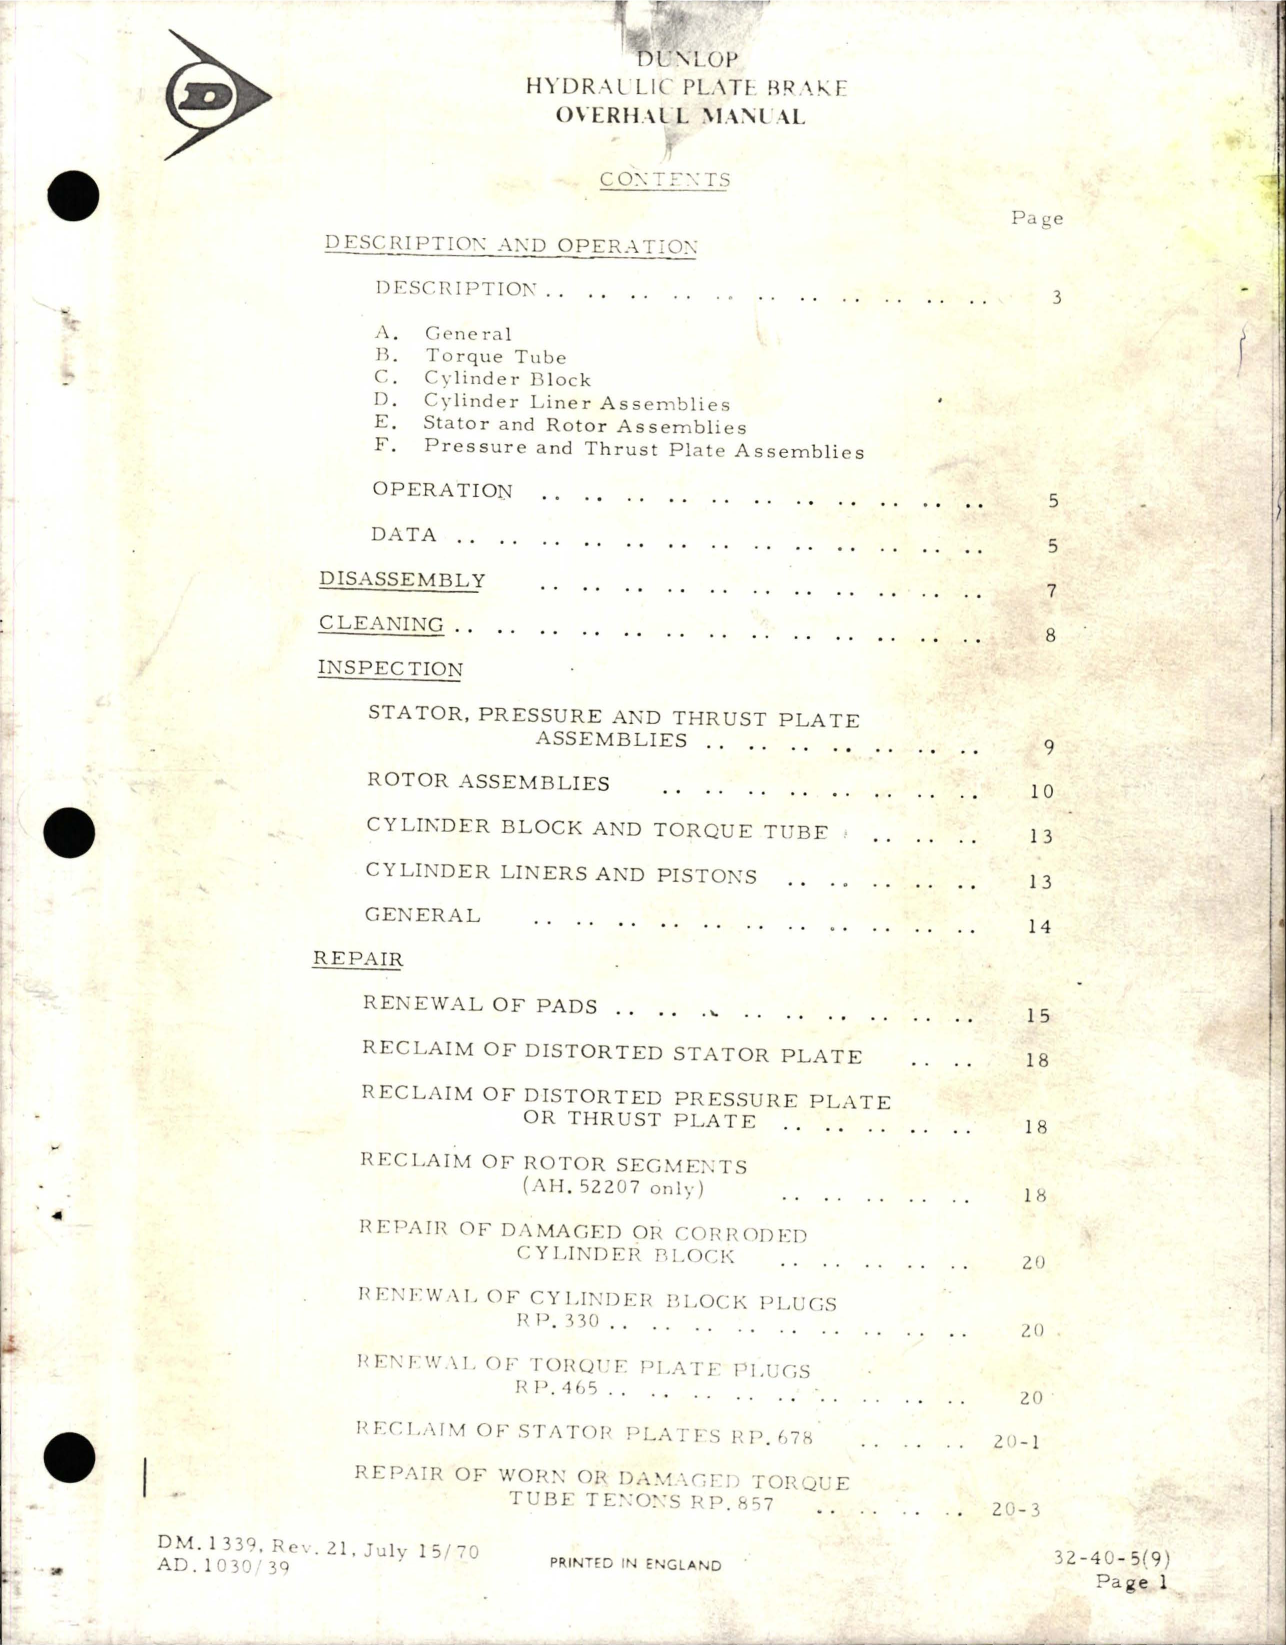 Sample page 1 from AirCorps Library document: Overhaul for Hydraulic Plate Brake